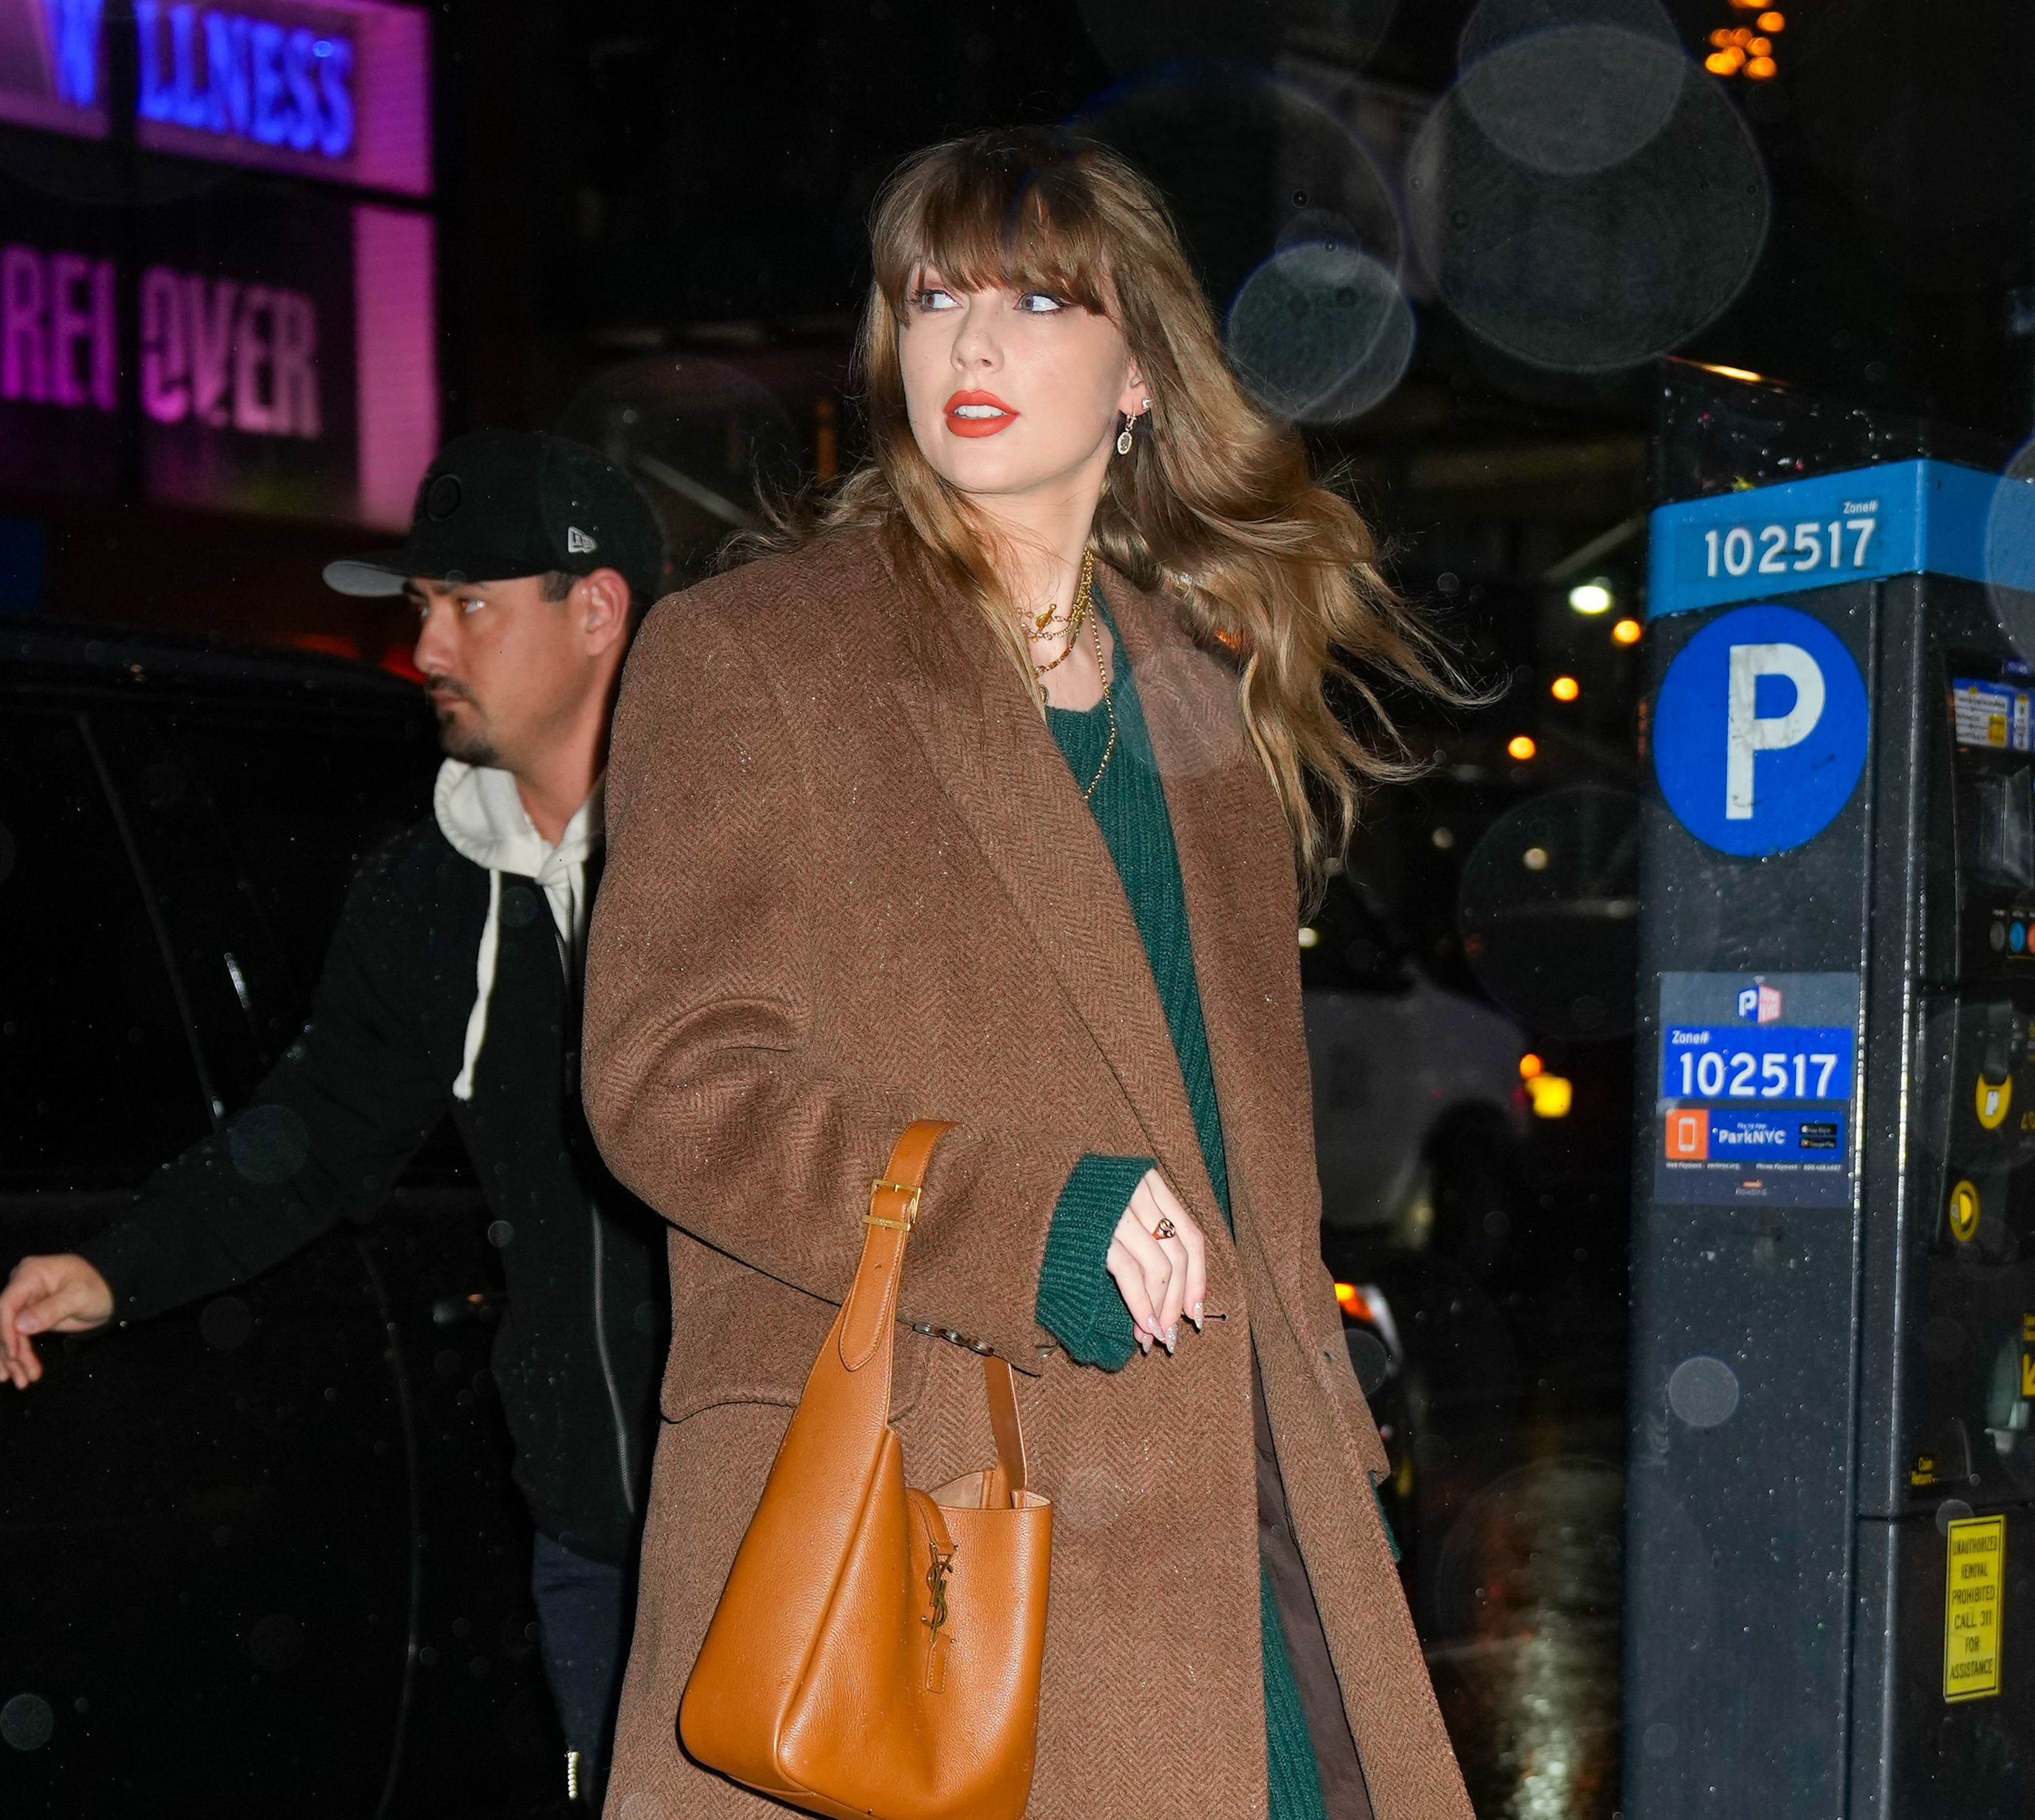 Close-up of Taylor outside wearing a coat